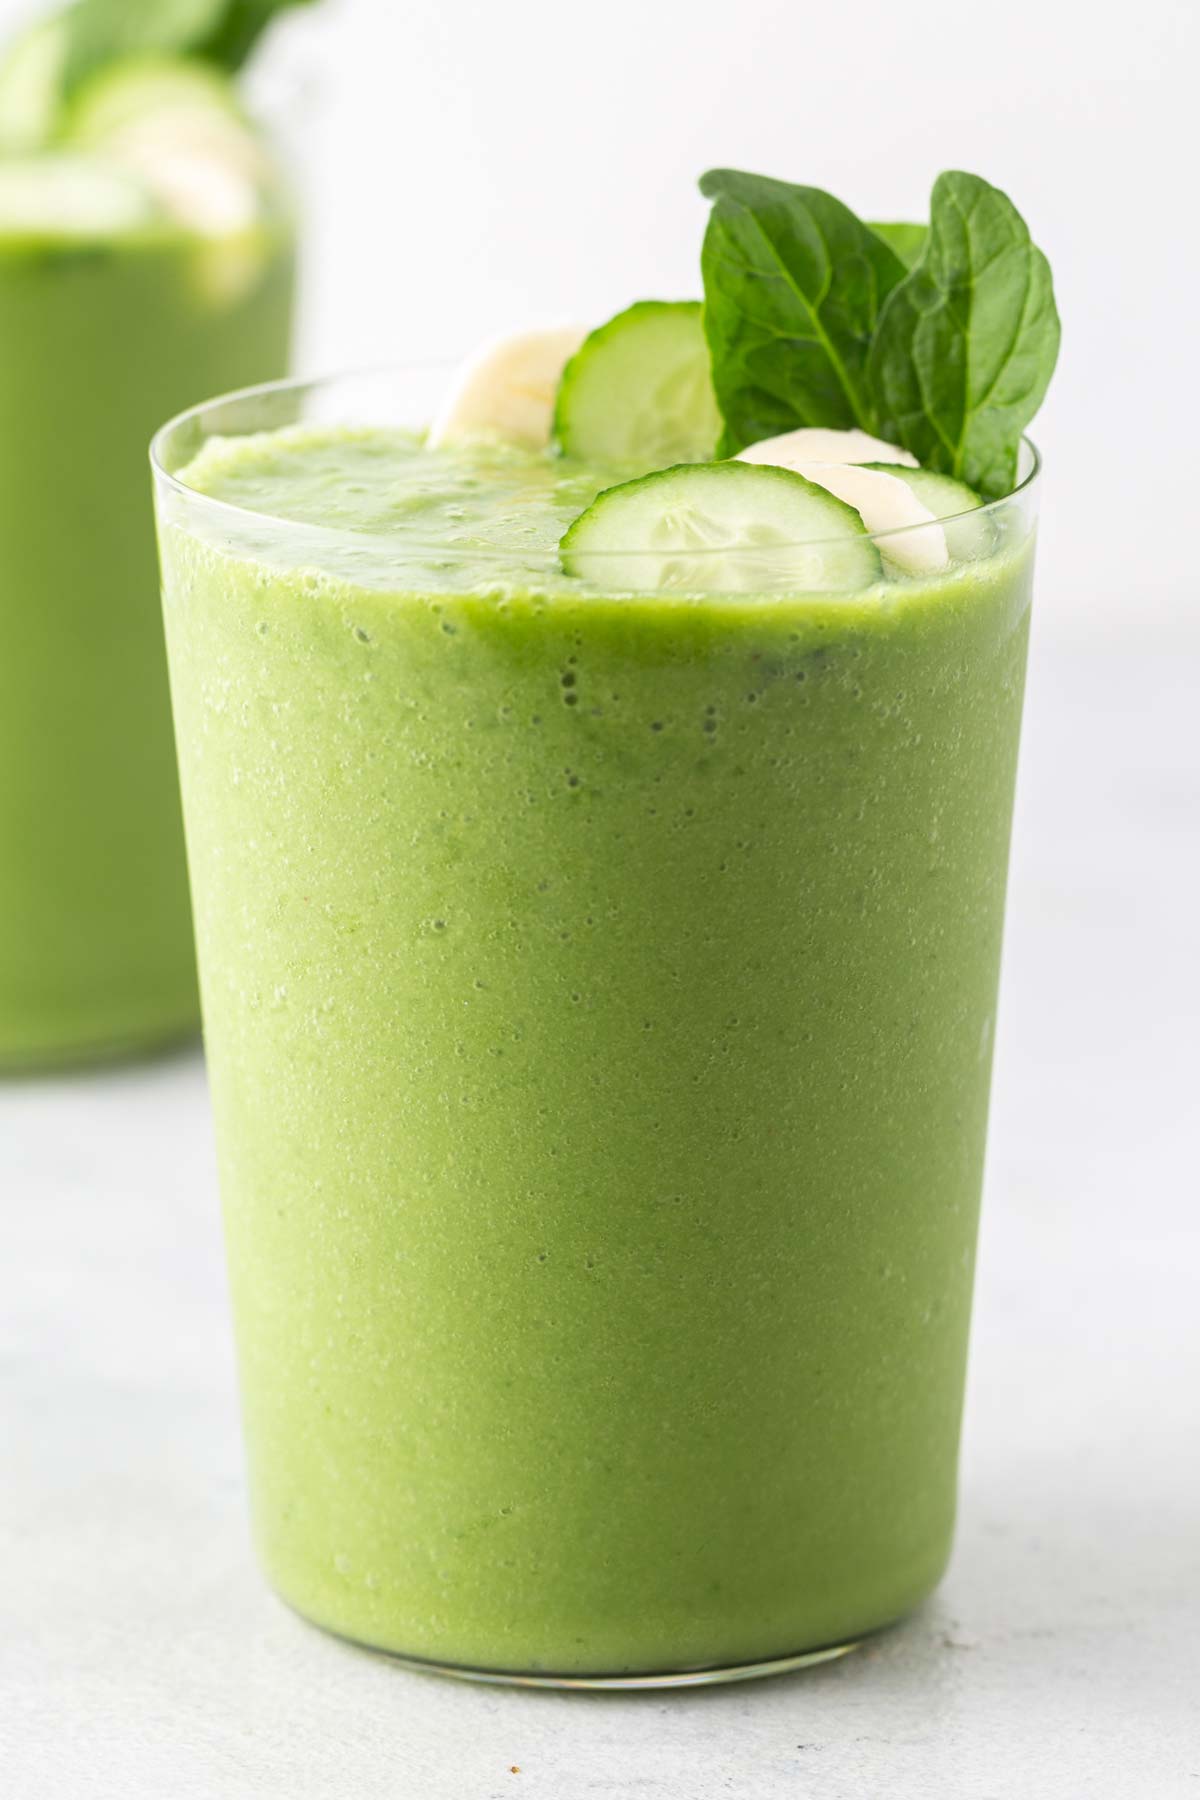 Cucumber smoothie in a glass.